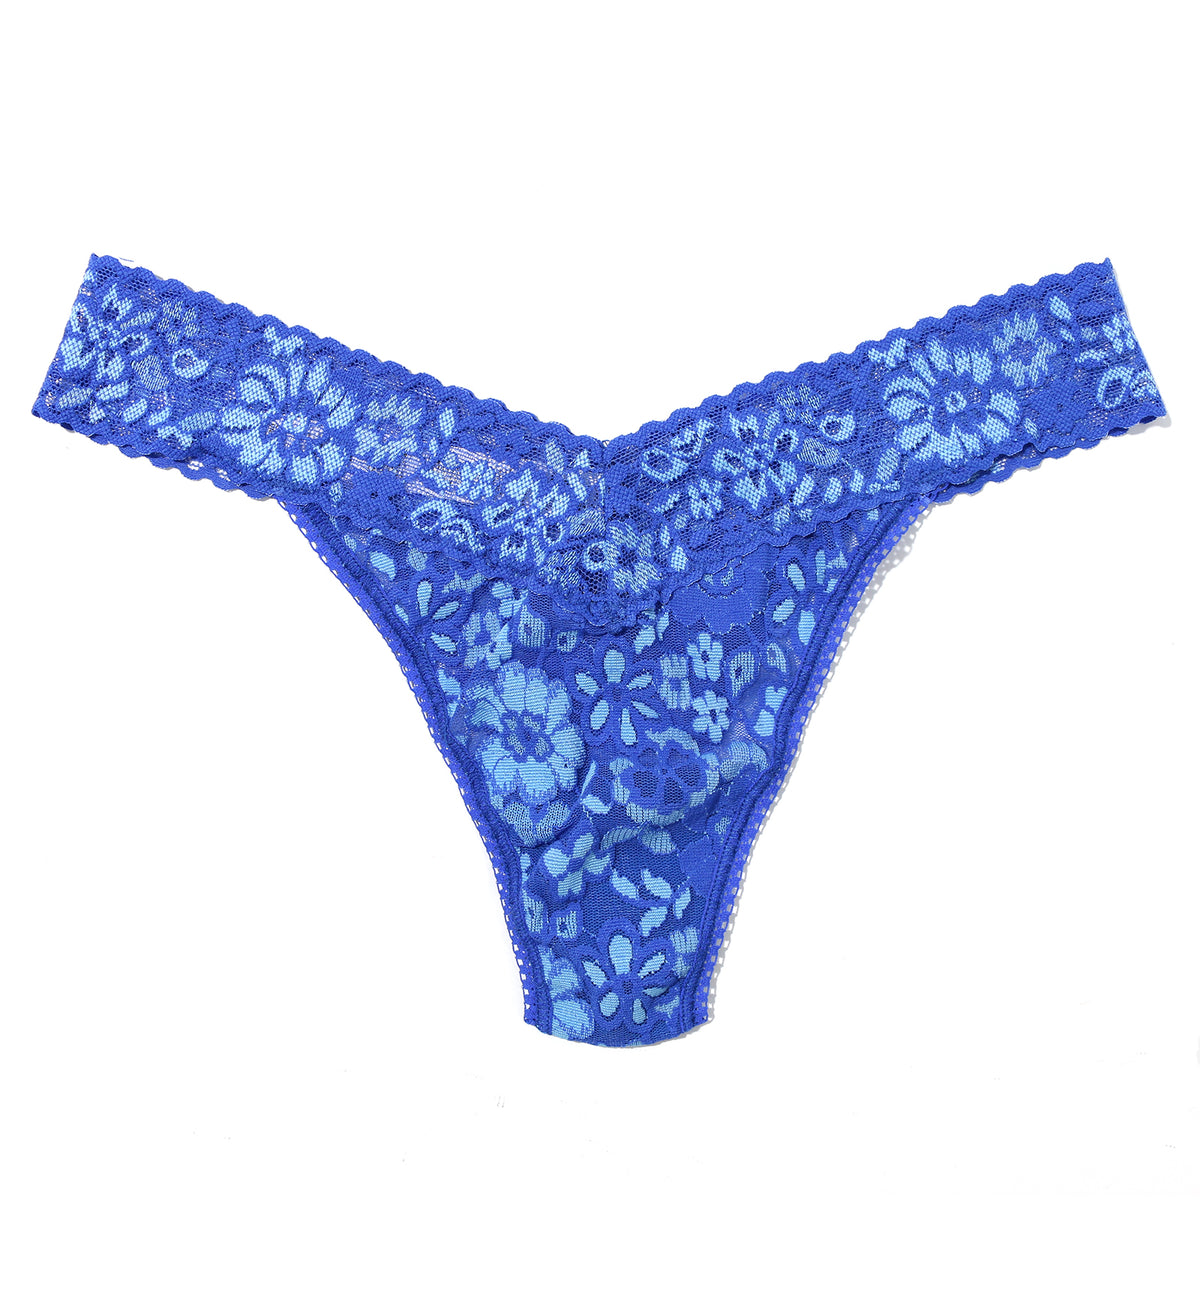 Hanky Panky Daily Lace Cross-Dye Original Rise Thong (791104),Blueberries/Butterfly - Blueberries/Butterfly,One Size